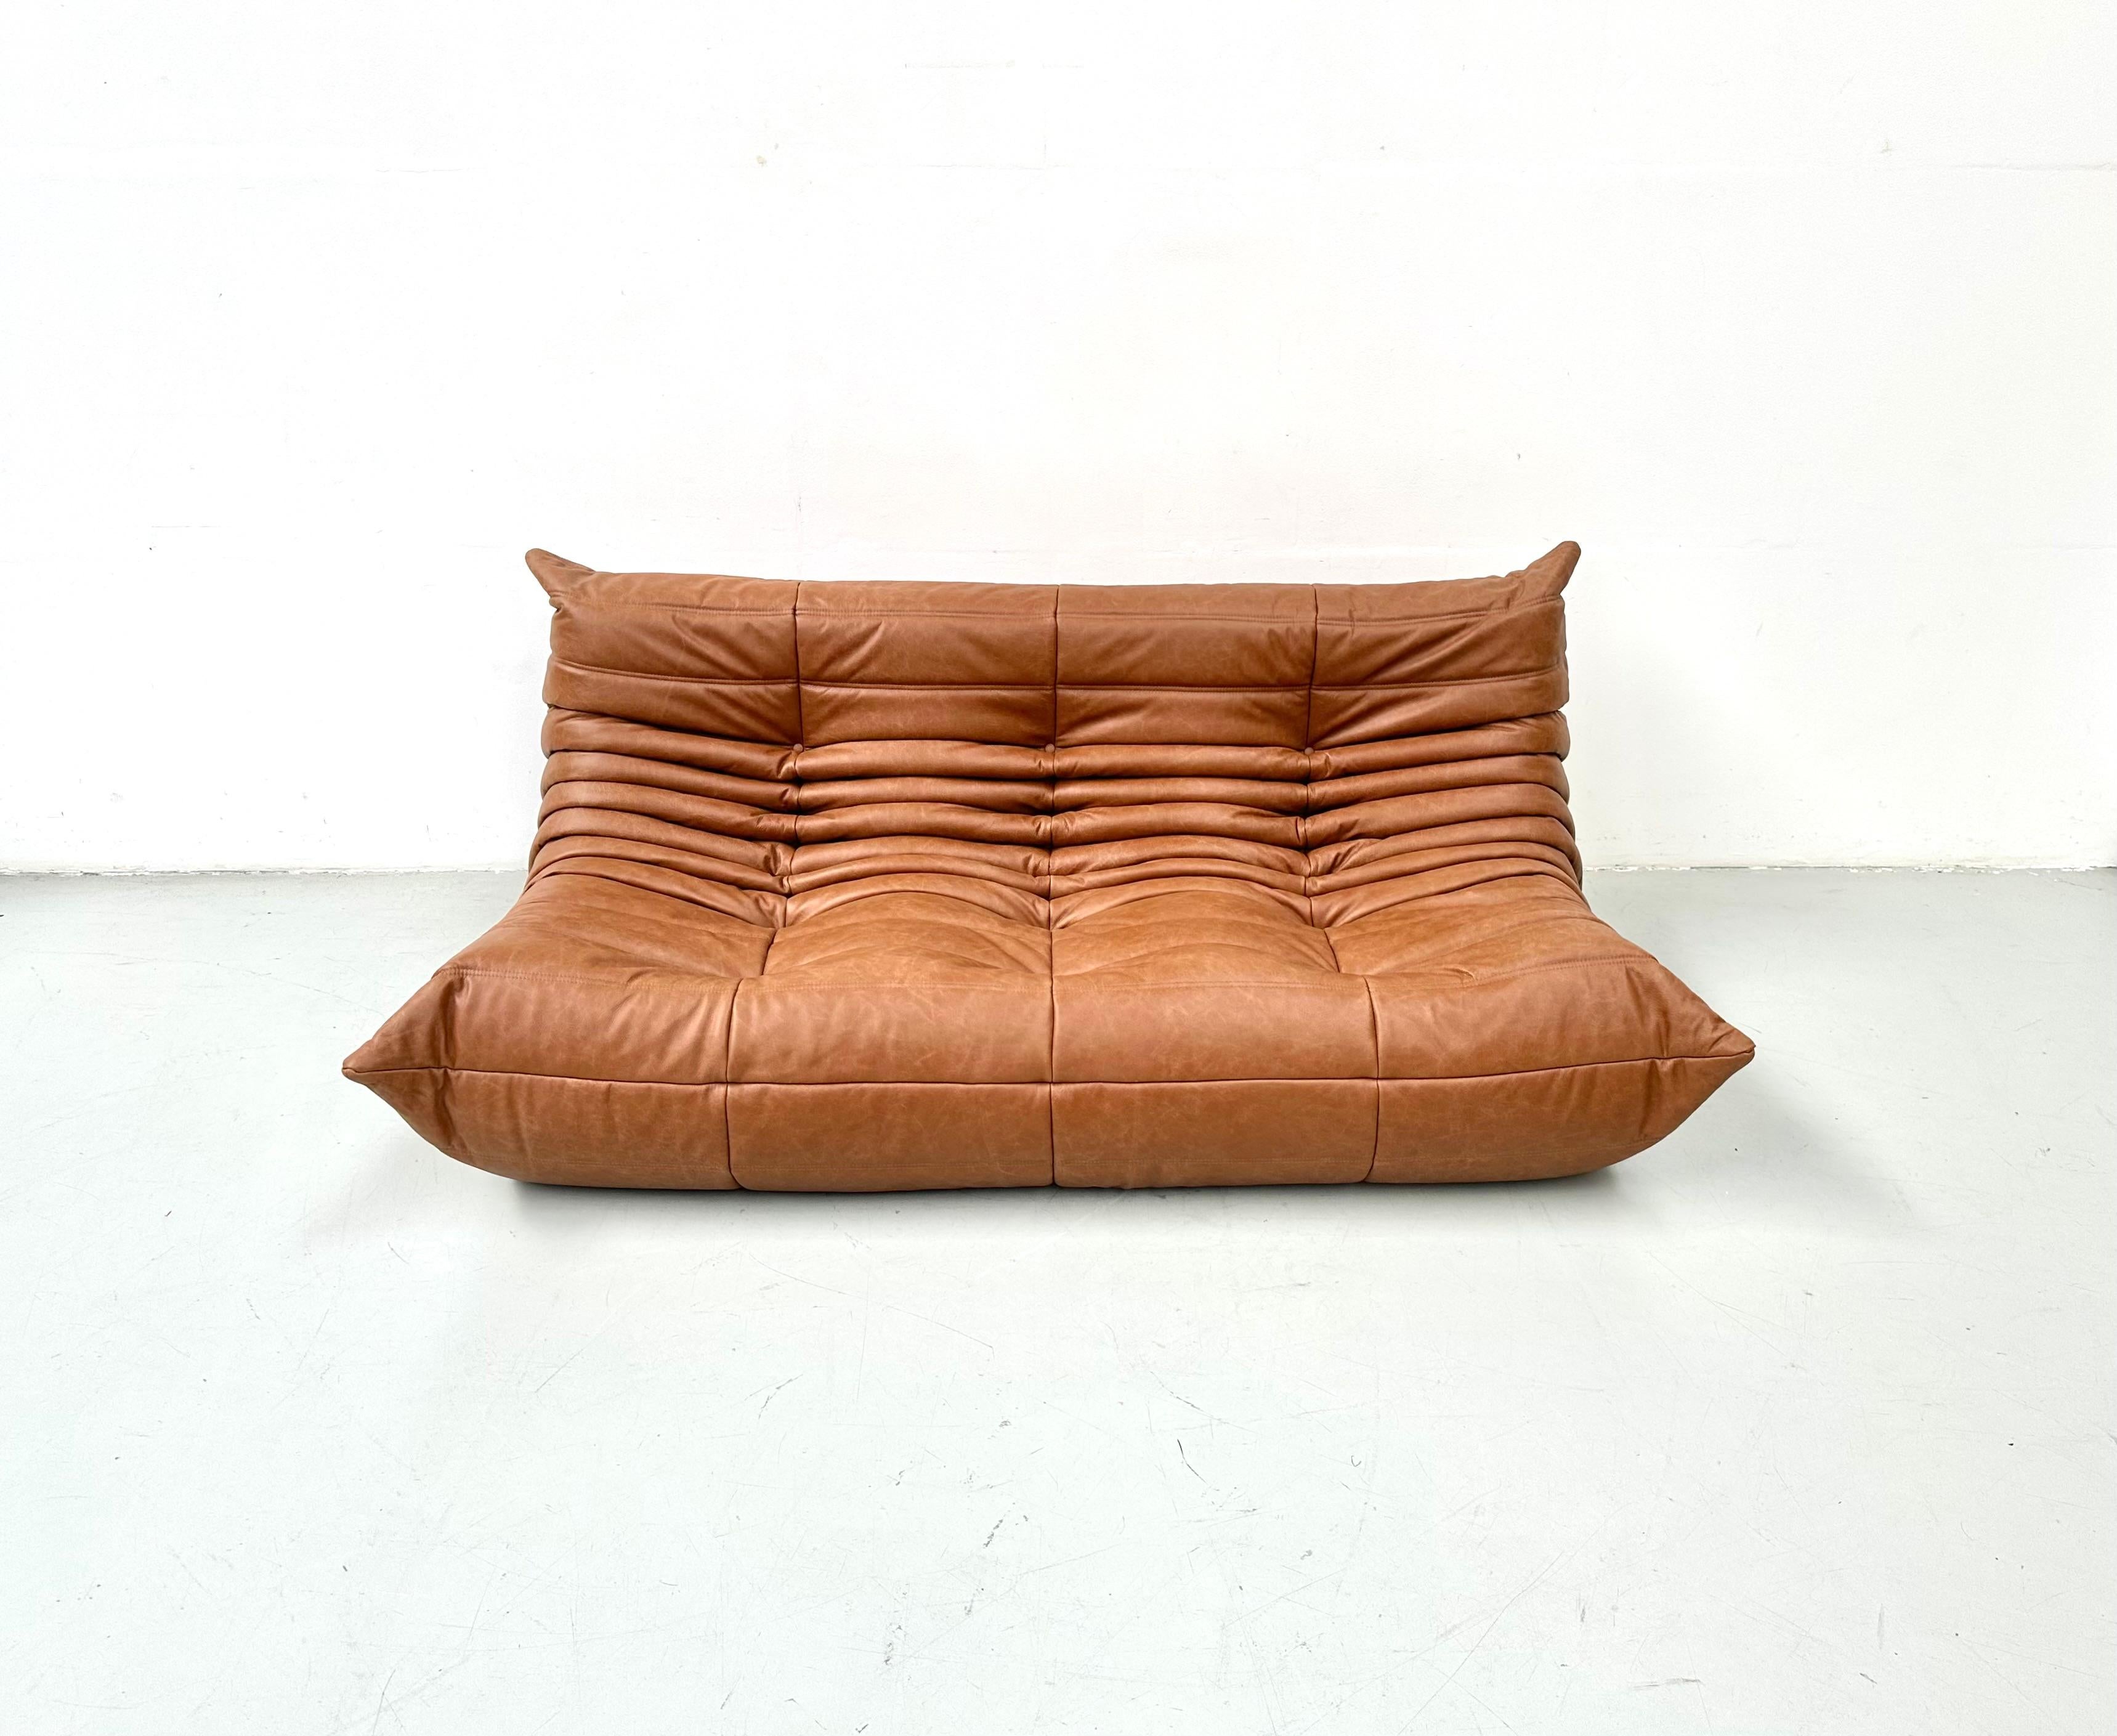 French Togo Sofa in Cognac  Leather by Michel Ducaroy for Ligne Roset. 3